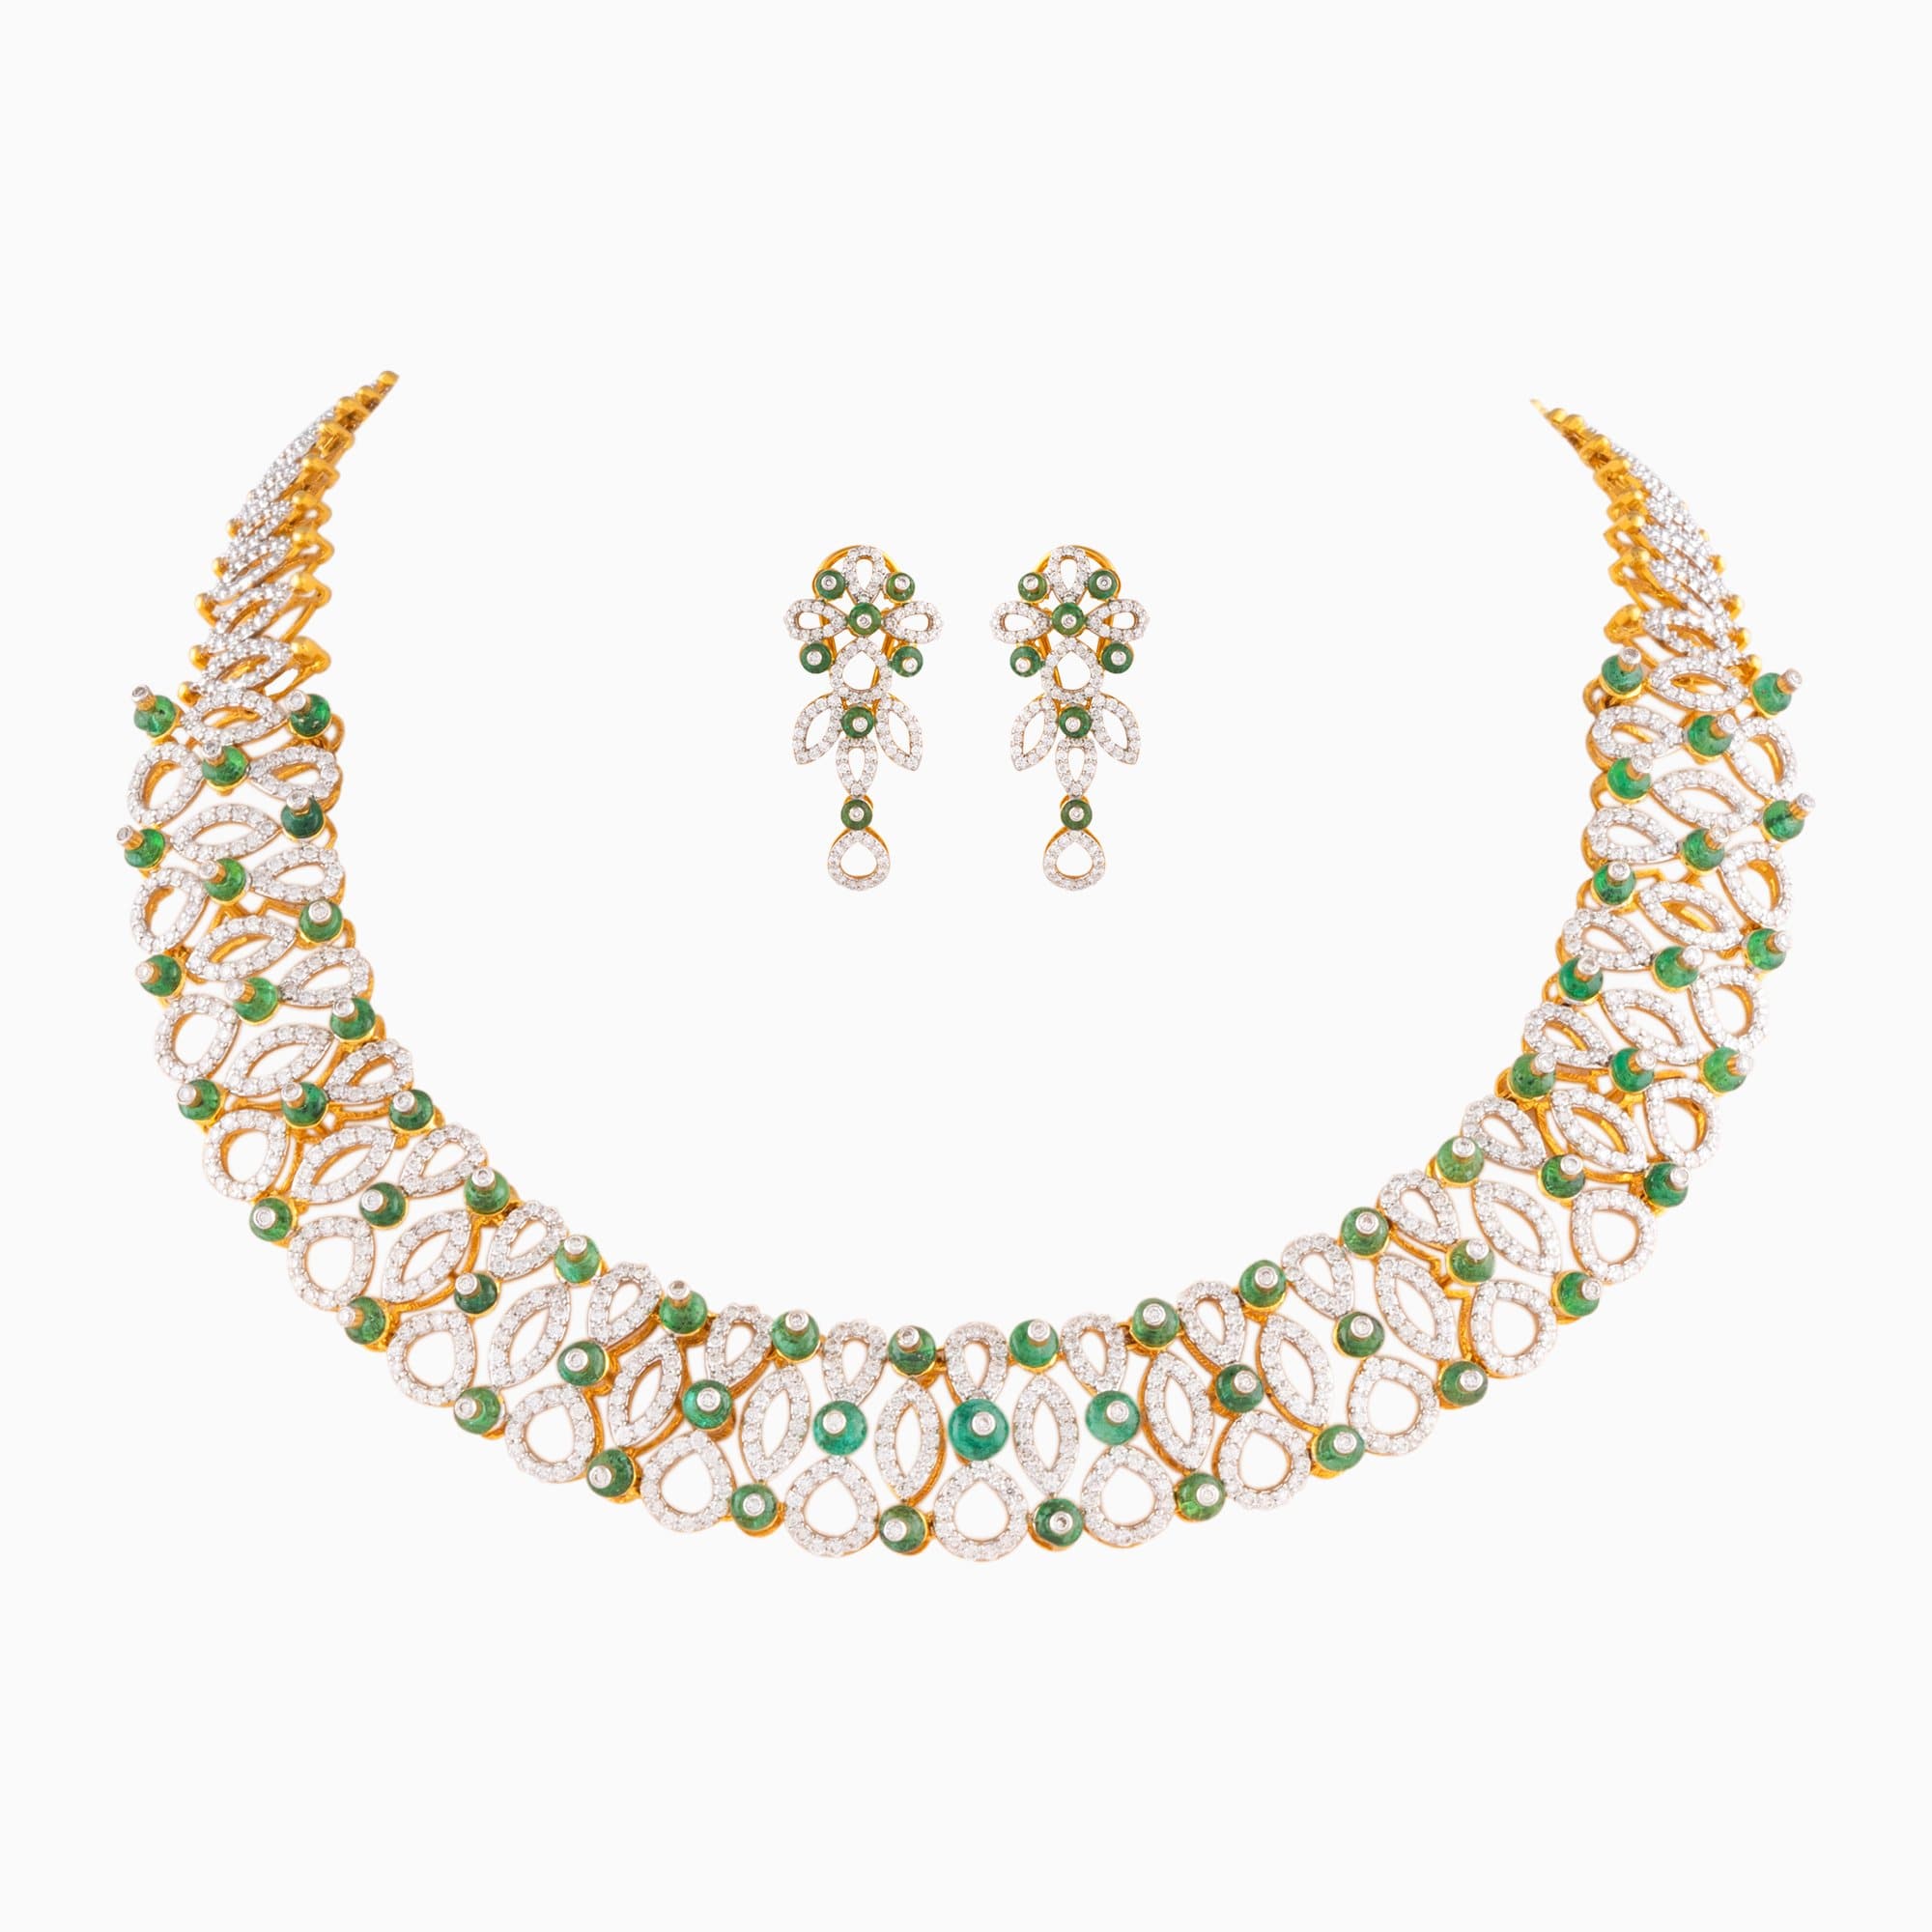 Necklace with Round Cut Diamond and Fungar Emerald Beads - WDN248